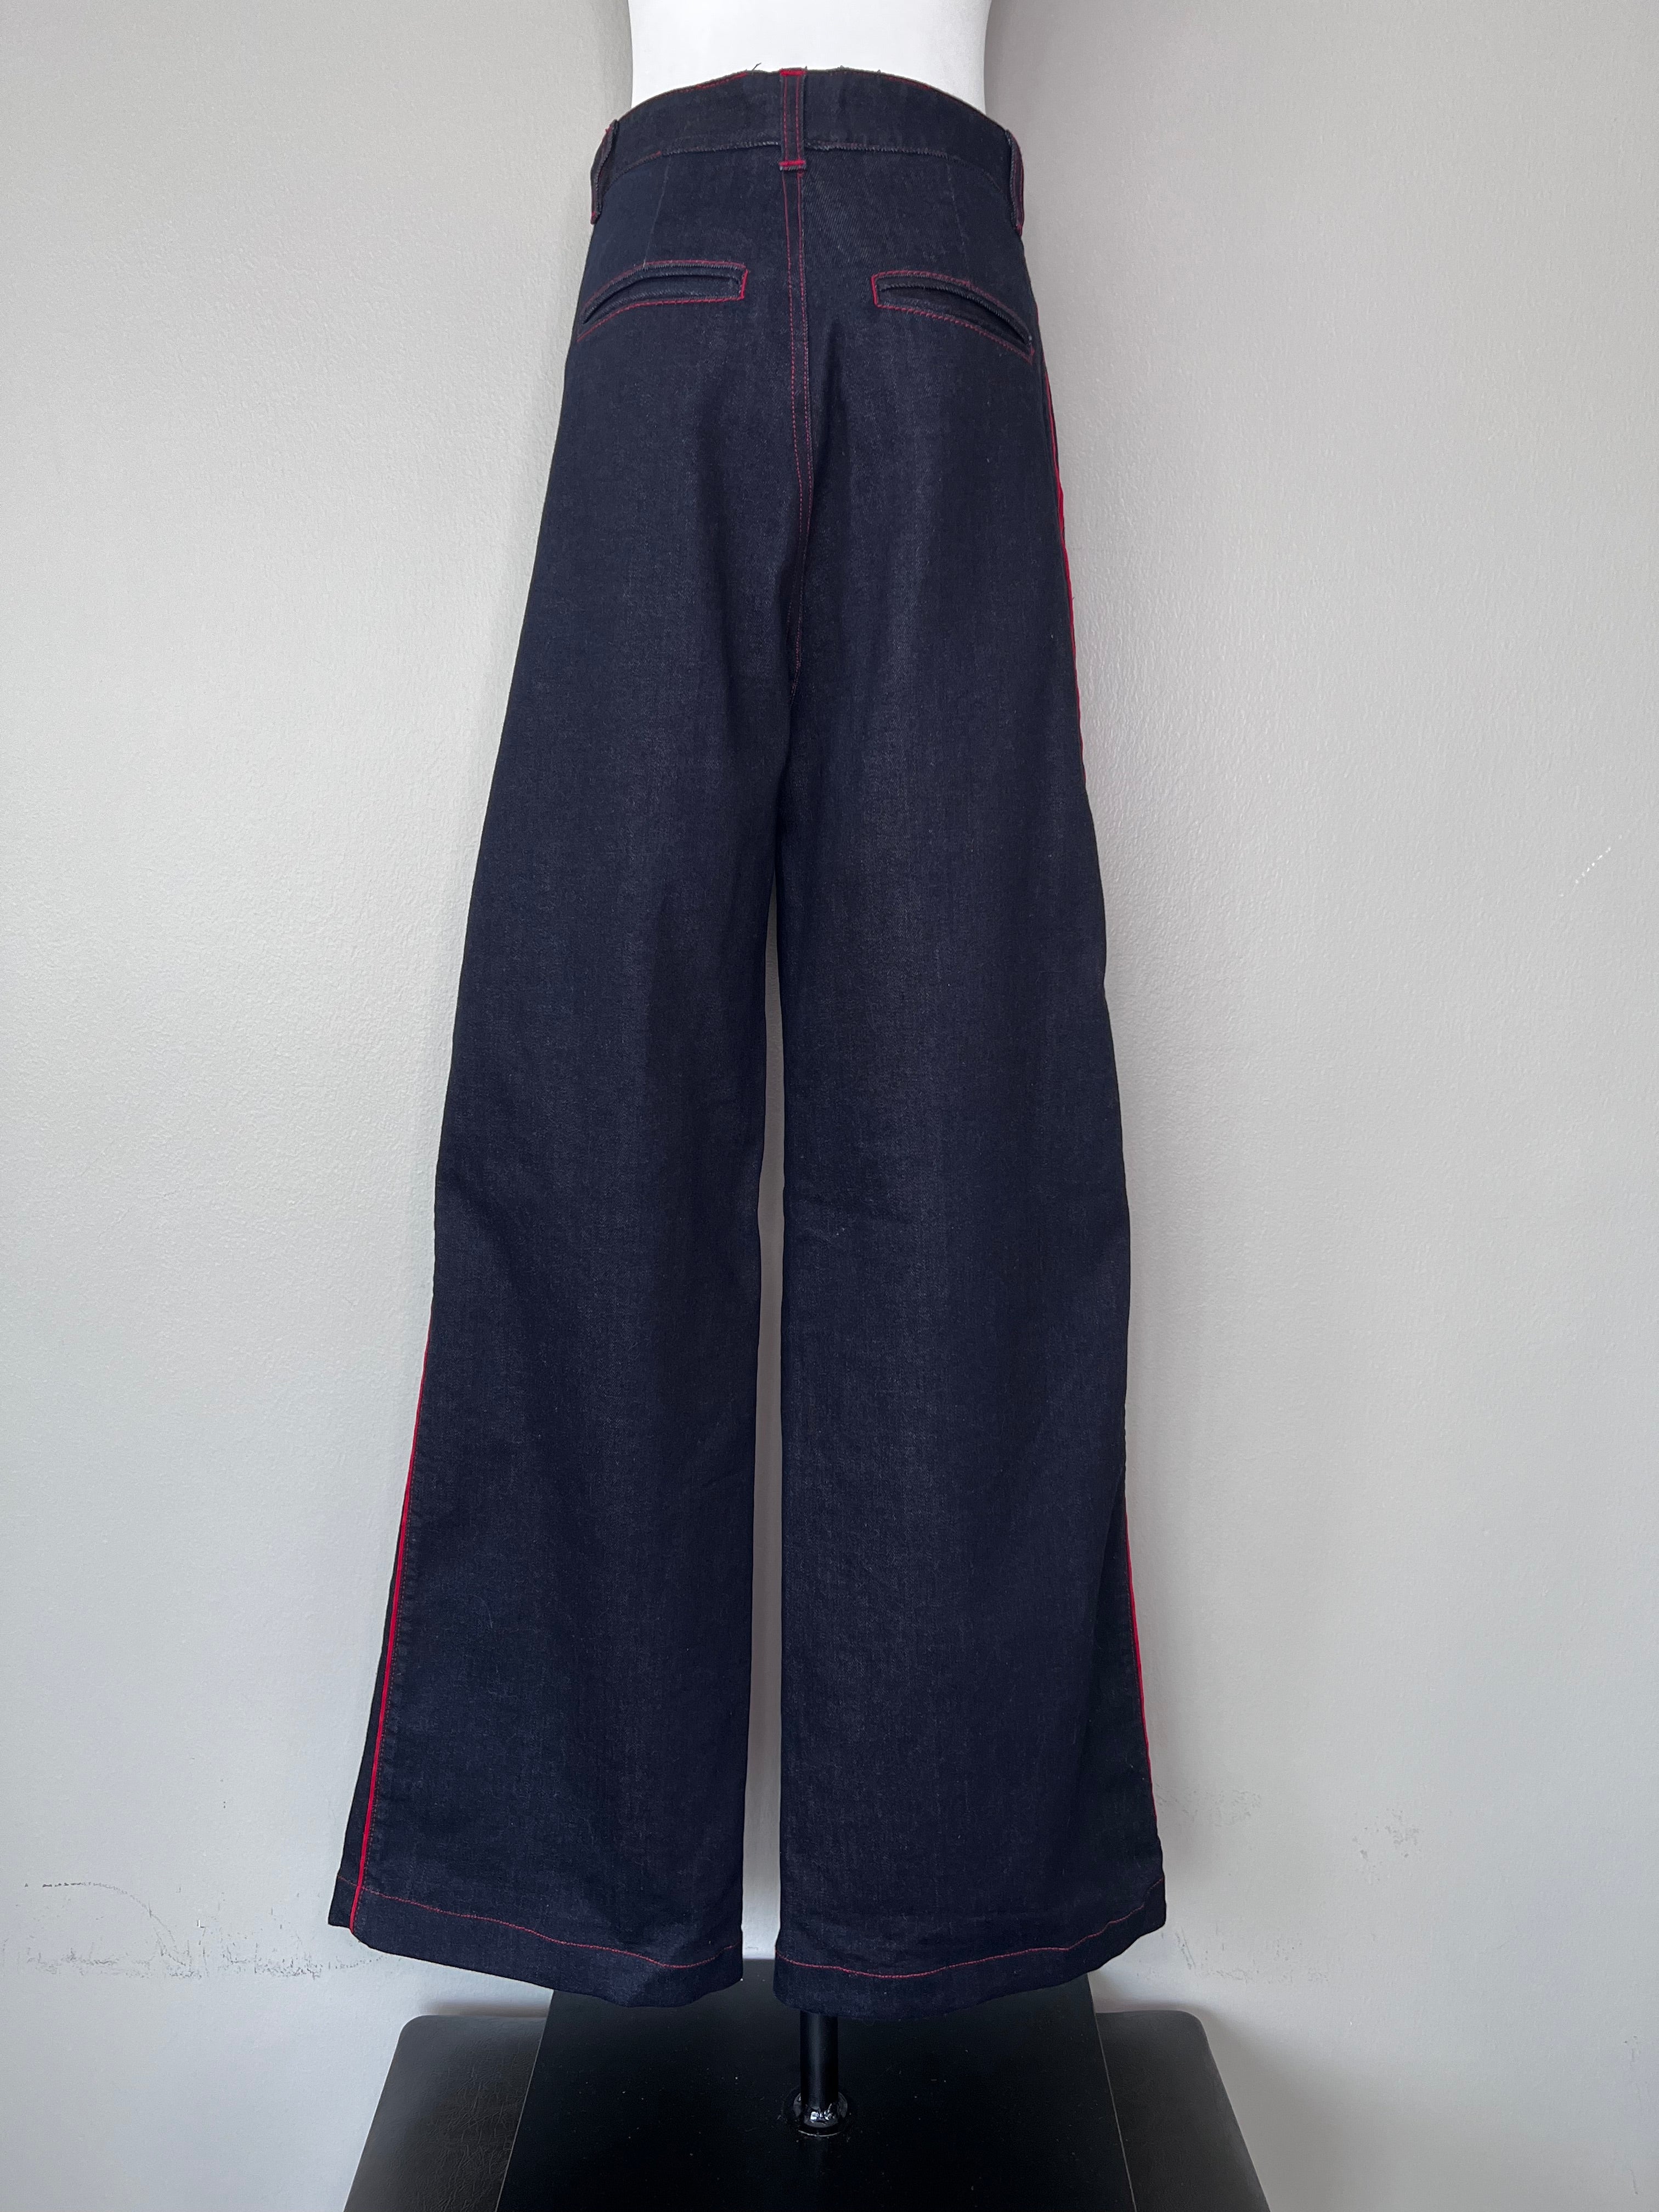 Dark wash super straight-legged jeans with a red seam along the side and the back pockets. - STELLA/ MCCARTNEY